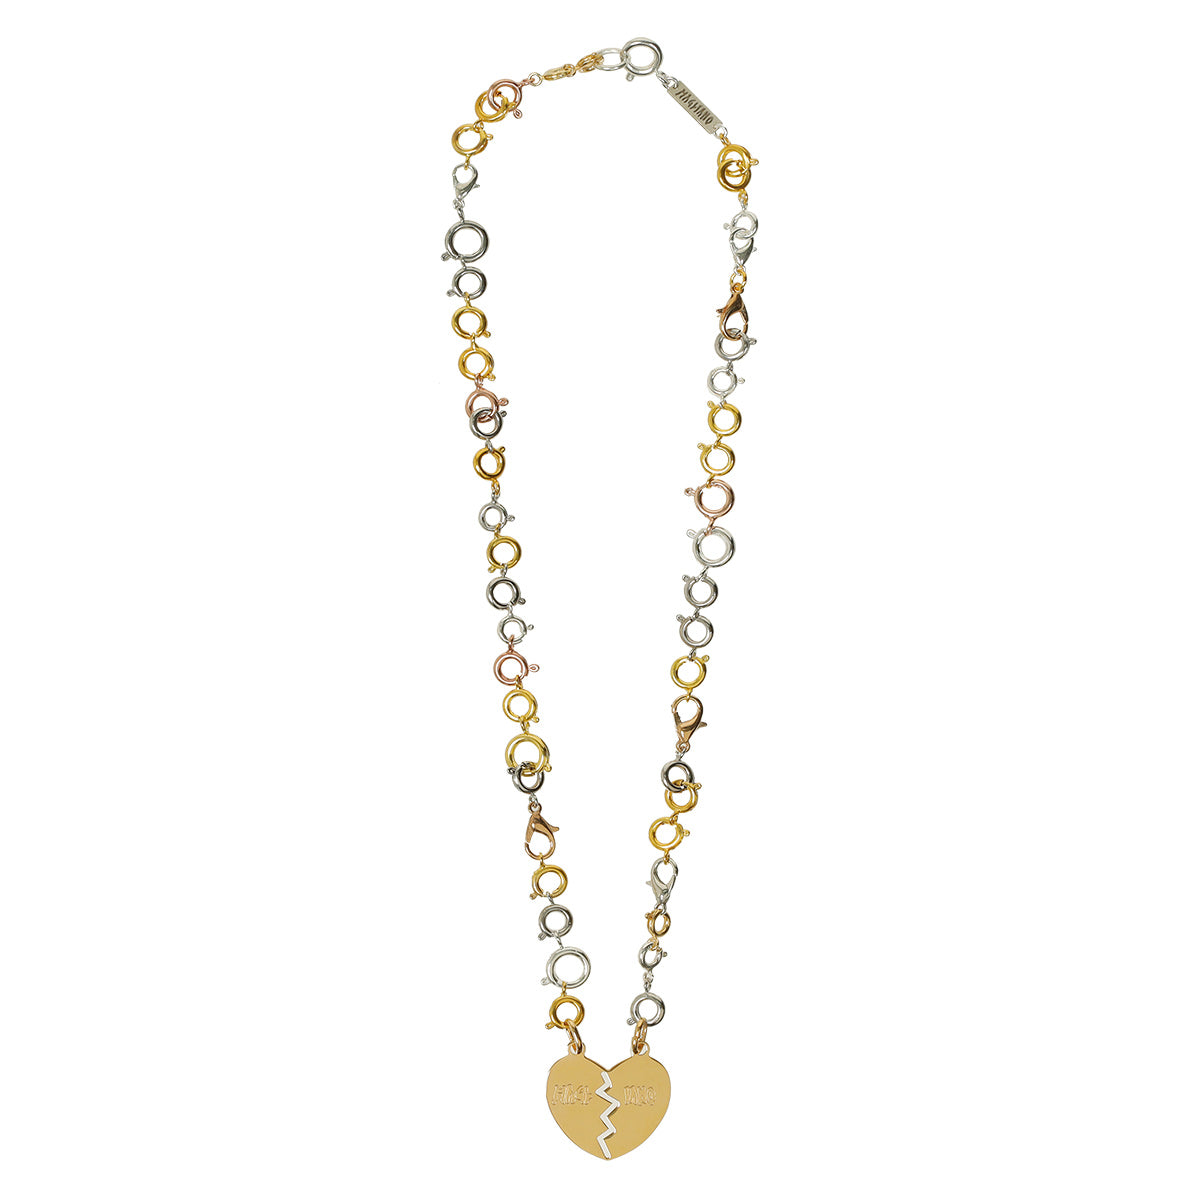 Magliano (マリアーノ) - BROKEN HEART NECKLACE ネックレス | cherry 